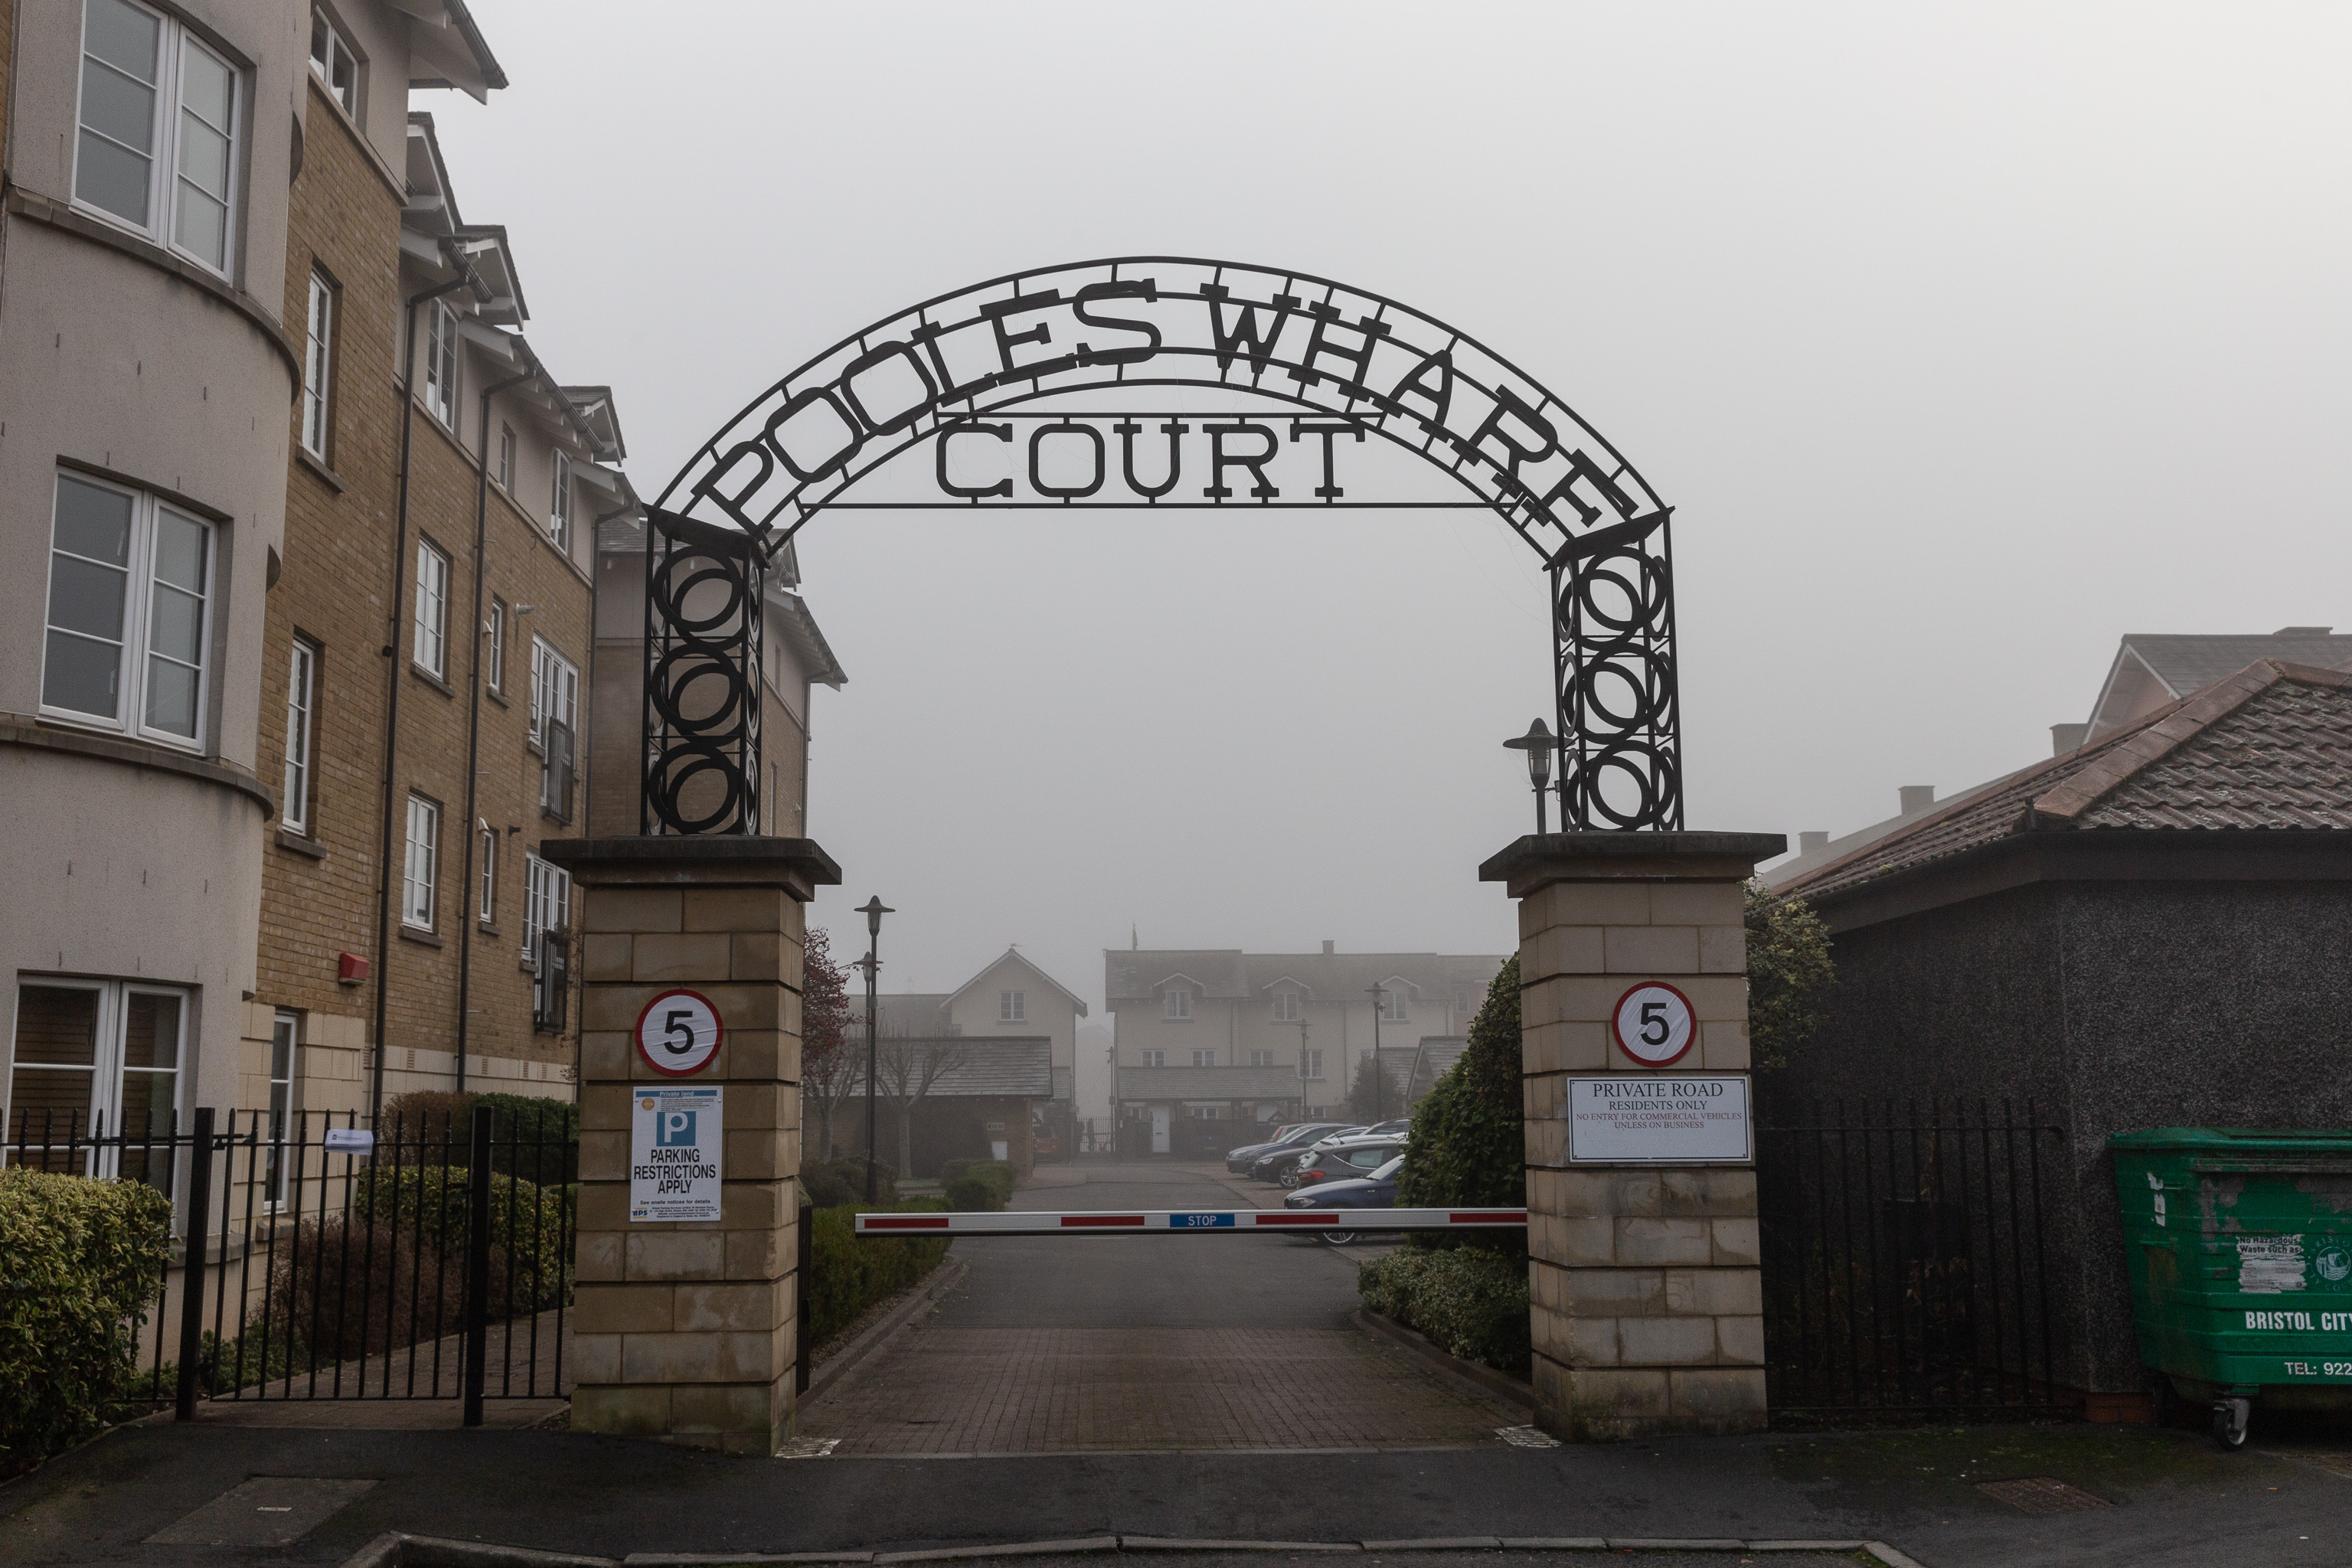 Poole's Wharf Court
It's a private estate, but I figured nobody would object too much if I wandered straight through. I don't push my way into private areas too much o...